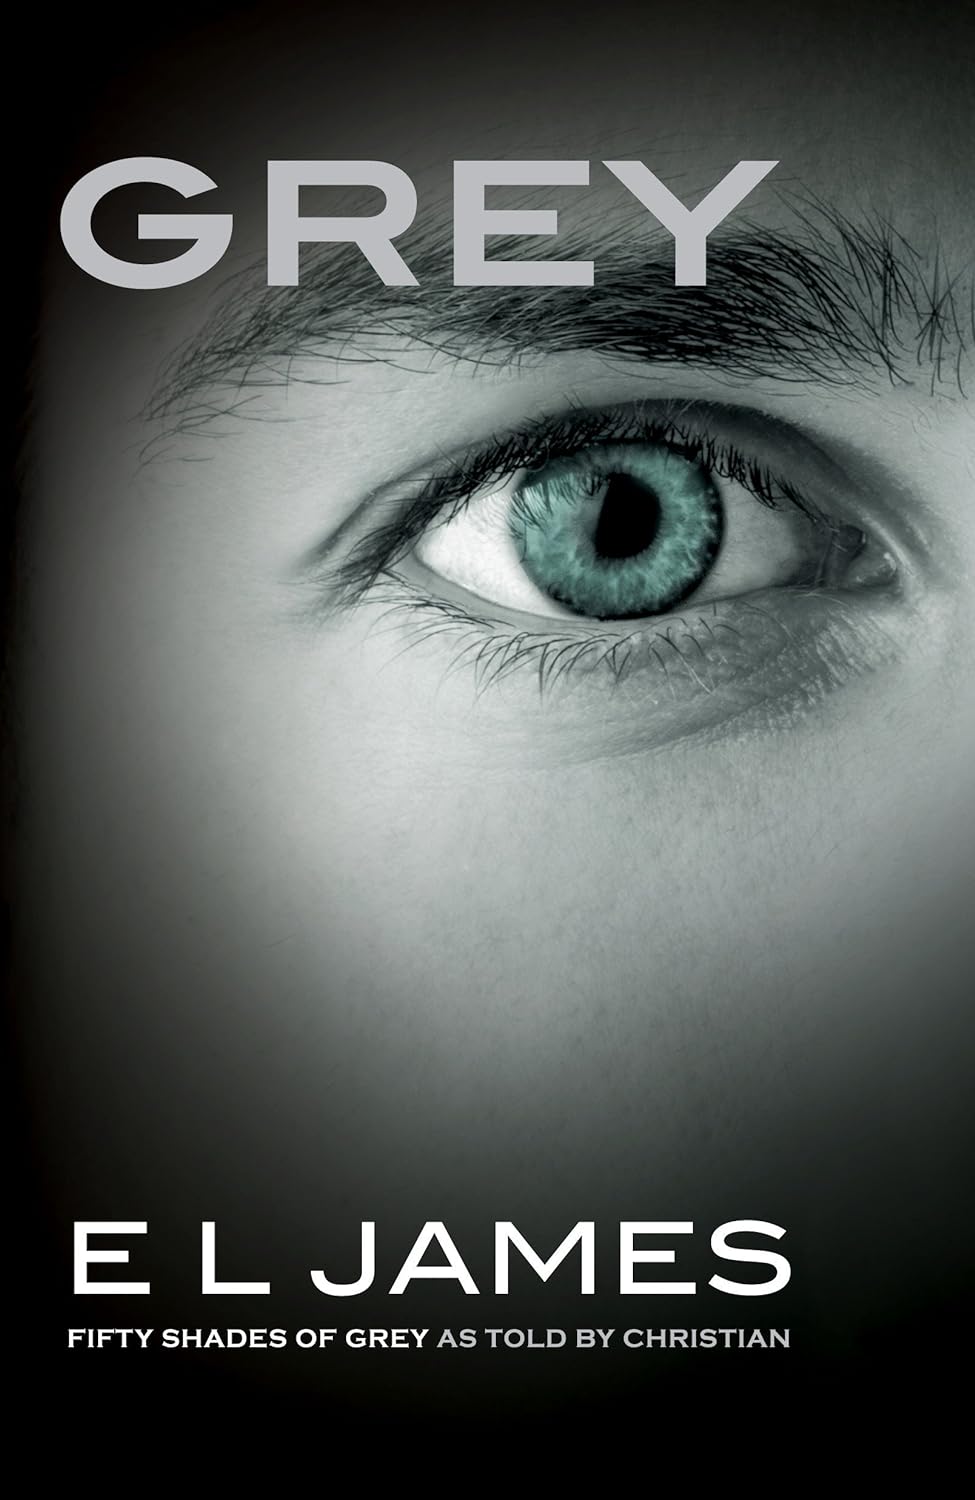 Grey: Fifty Shades of Grey as Told by Christian - E.L. James